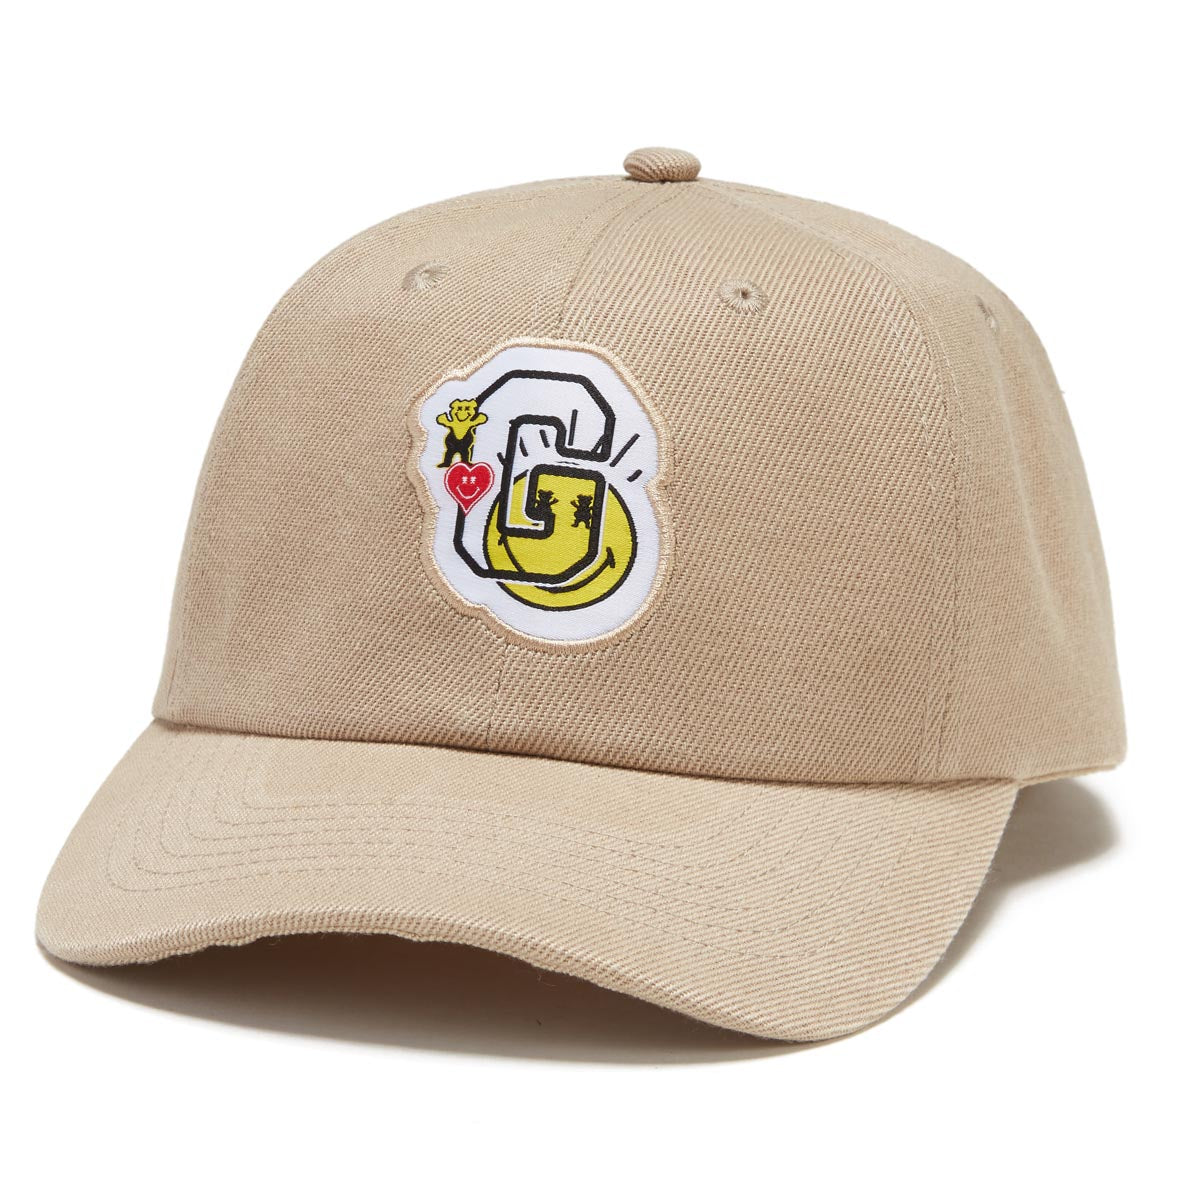 Grizzly x Smiley World Dad Hat - Tan image 1